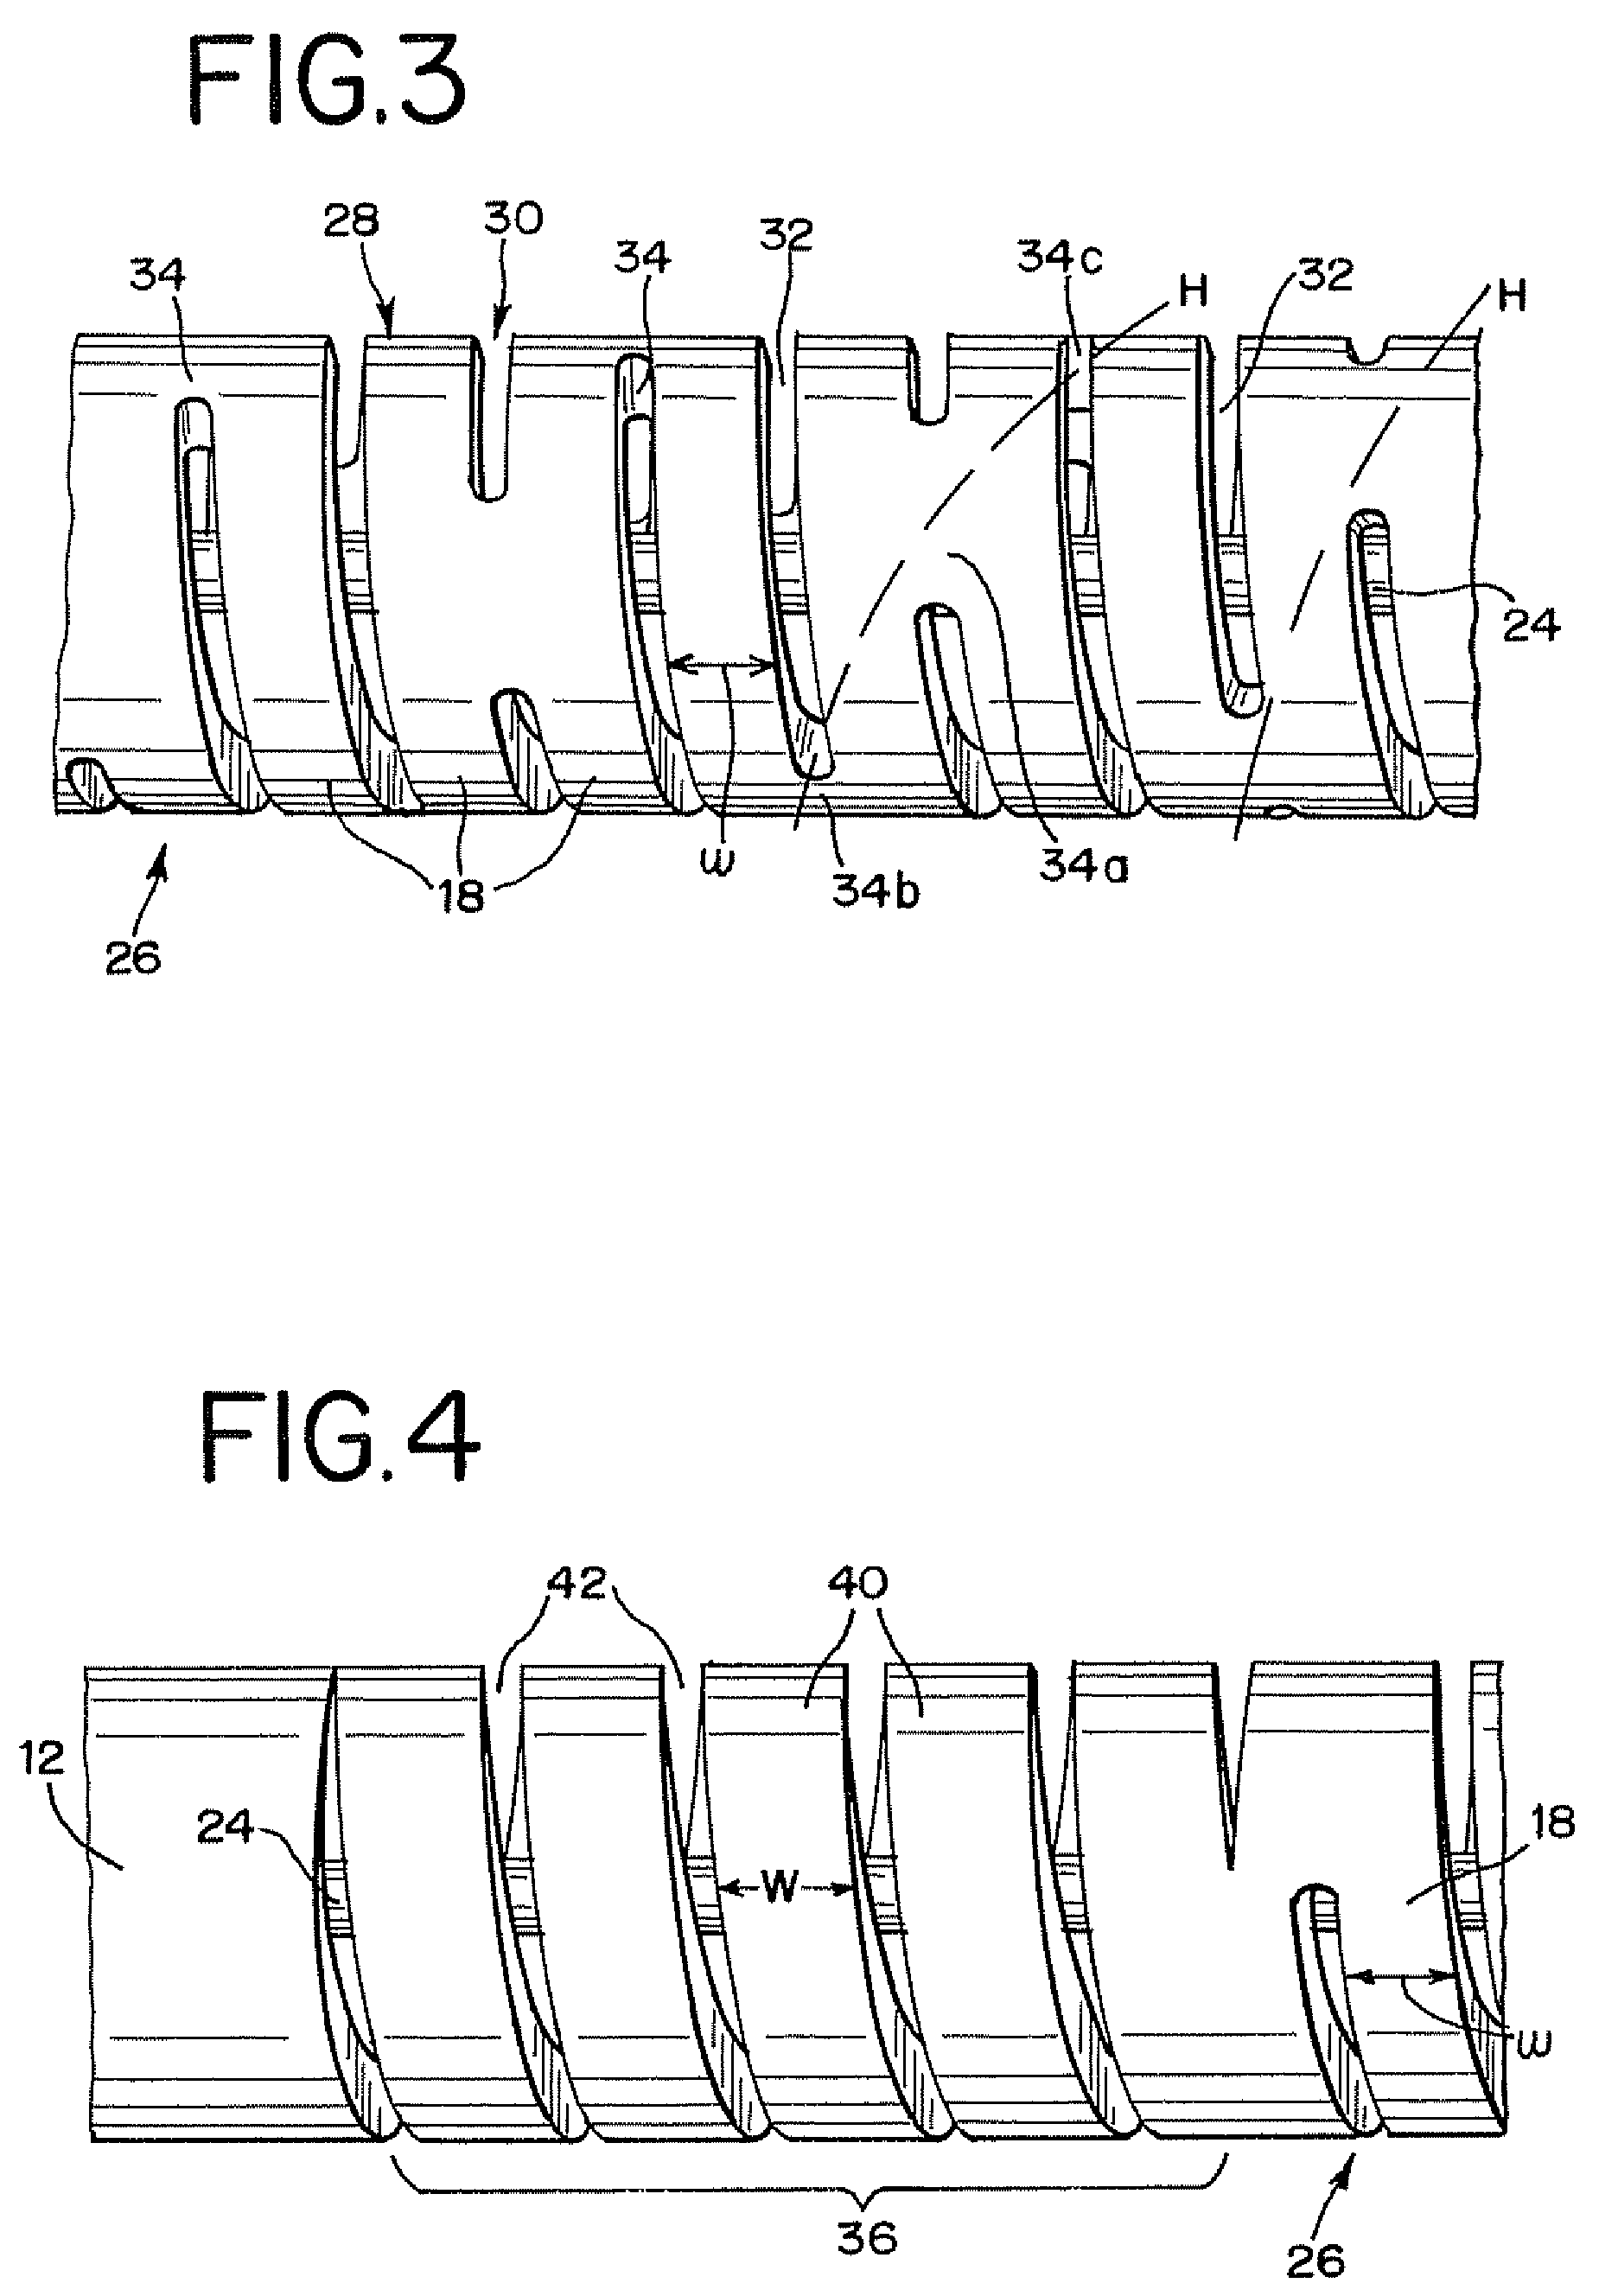 Interventional medical device system having an elongation retarding portion and method of using the same